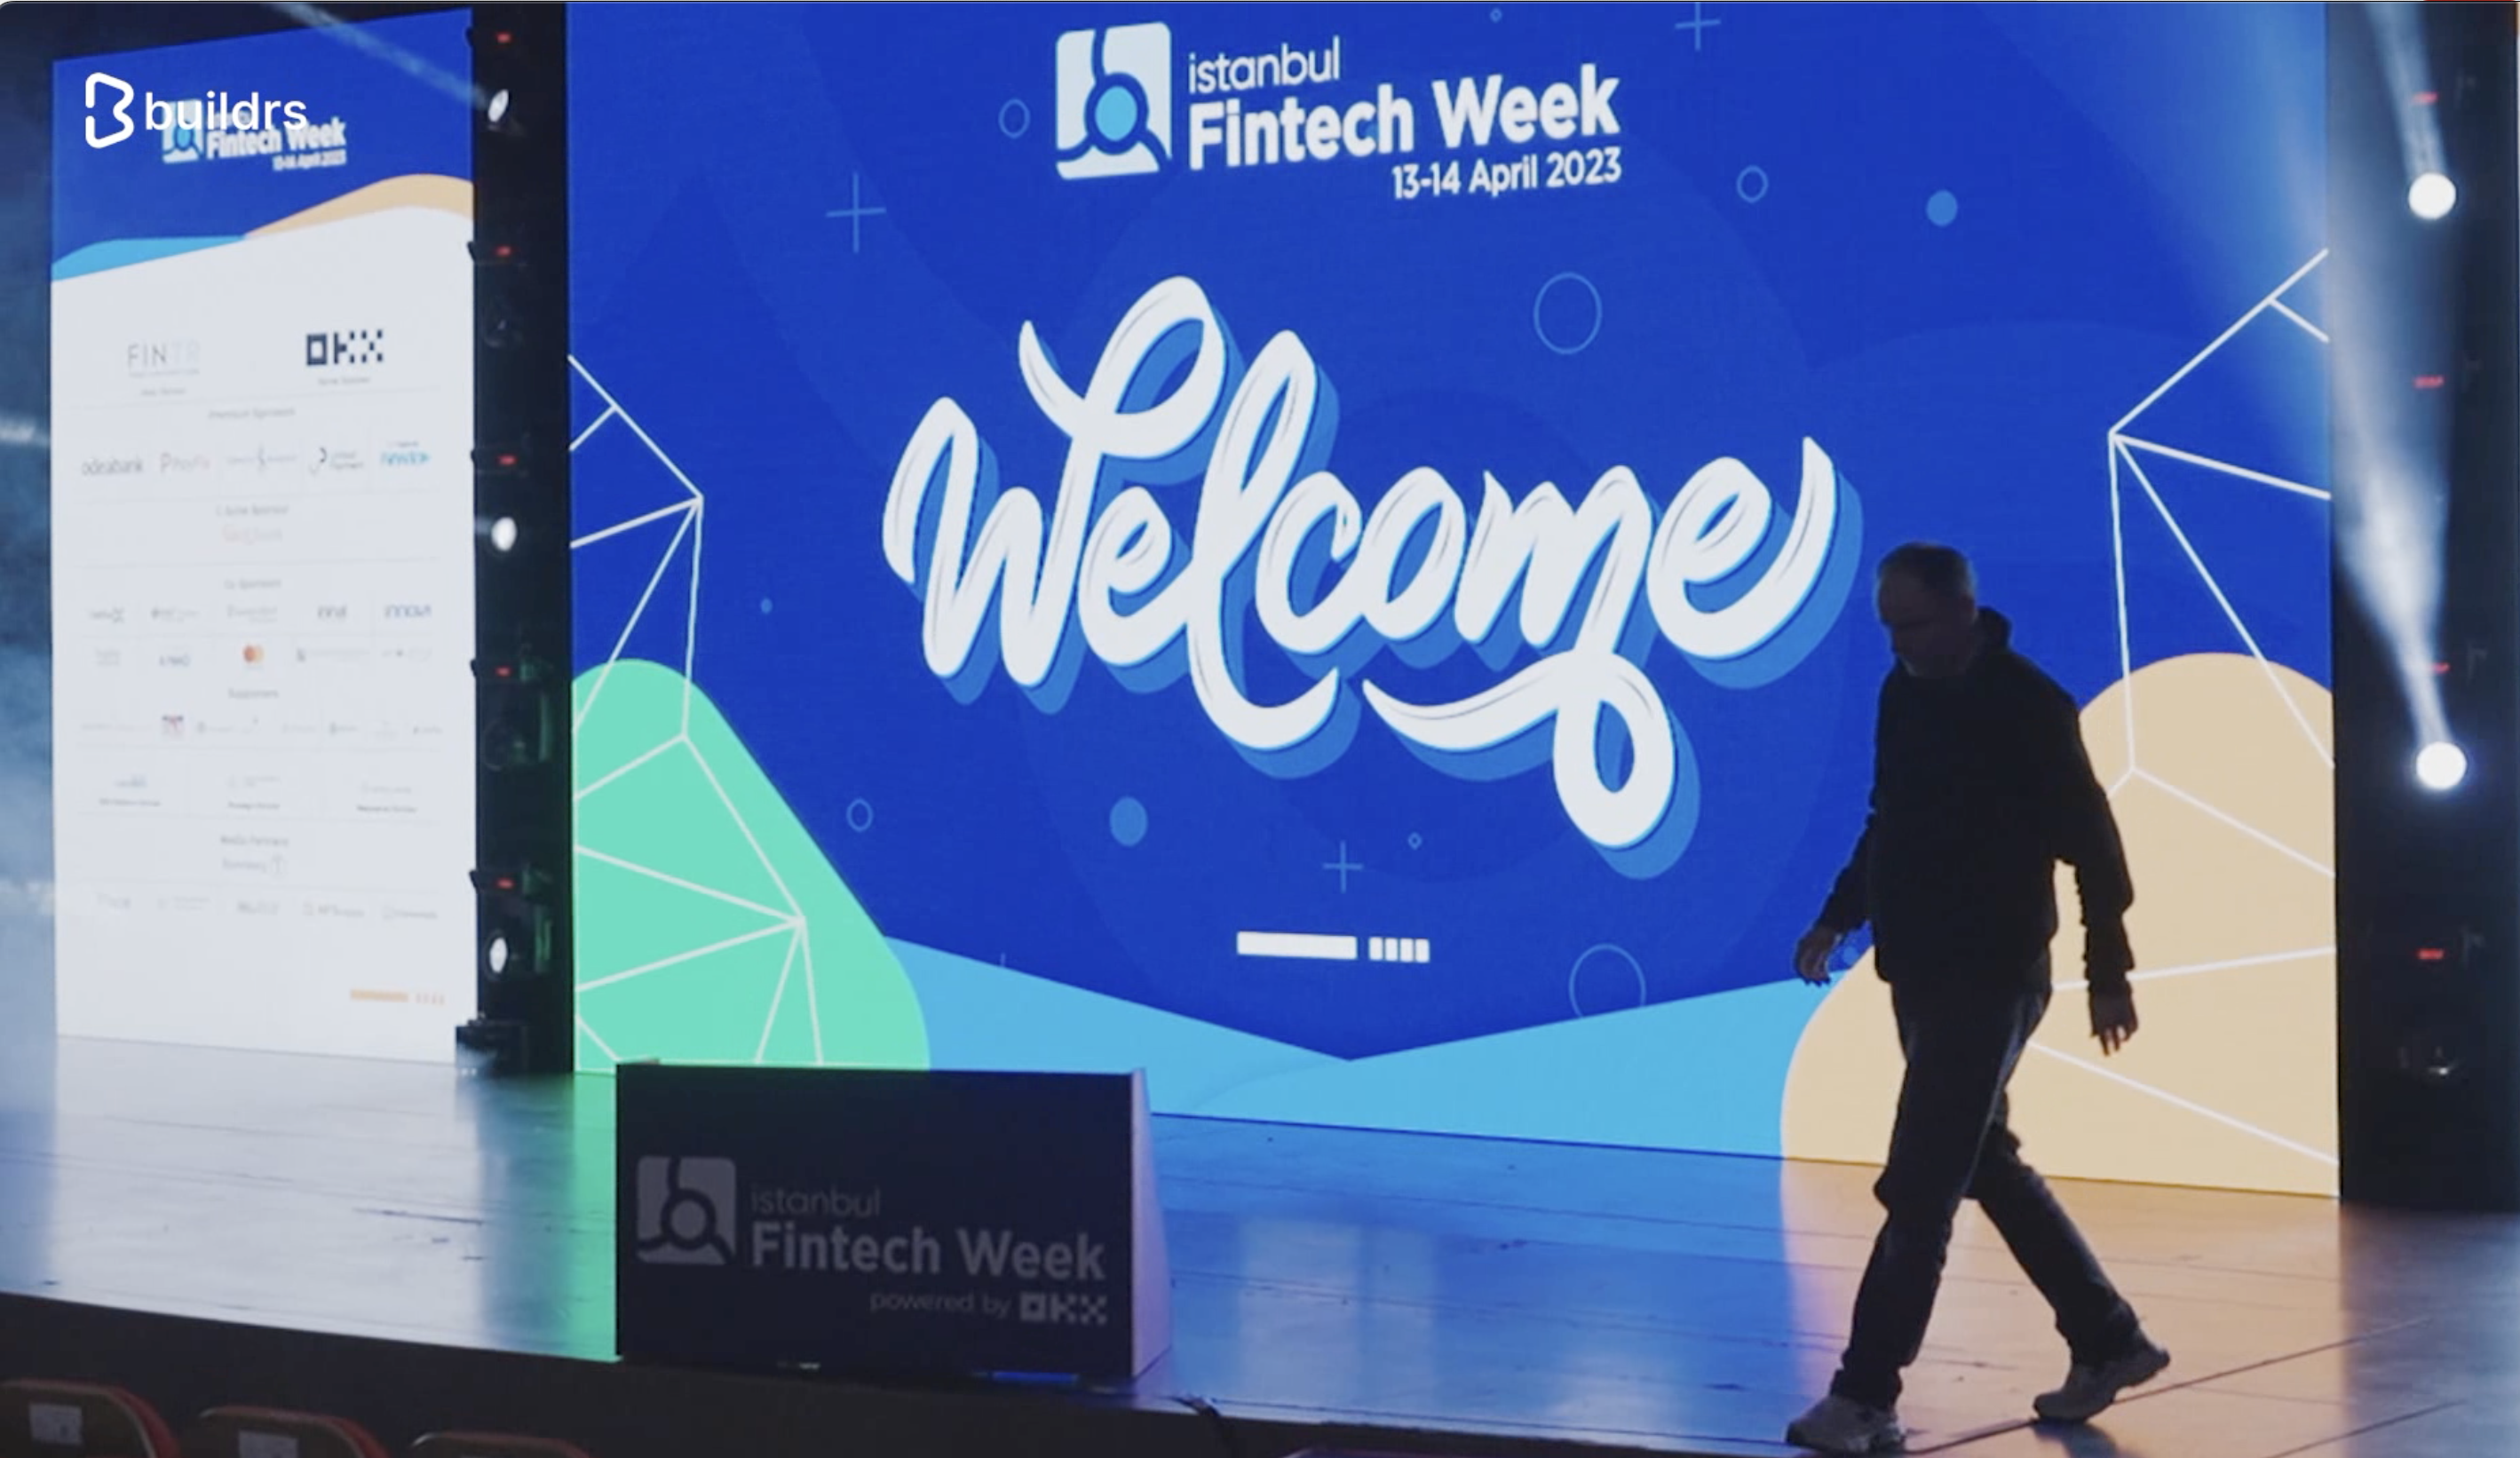 Buildrs at Istanbul Fintech Week